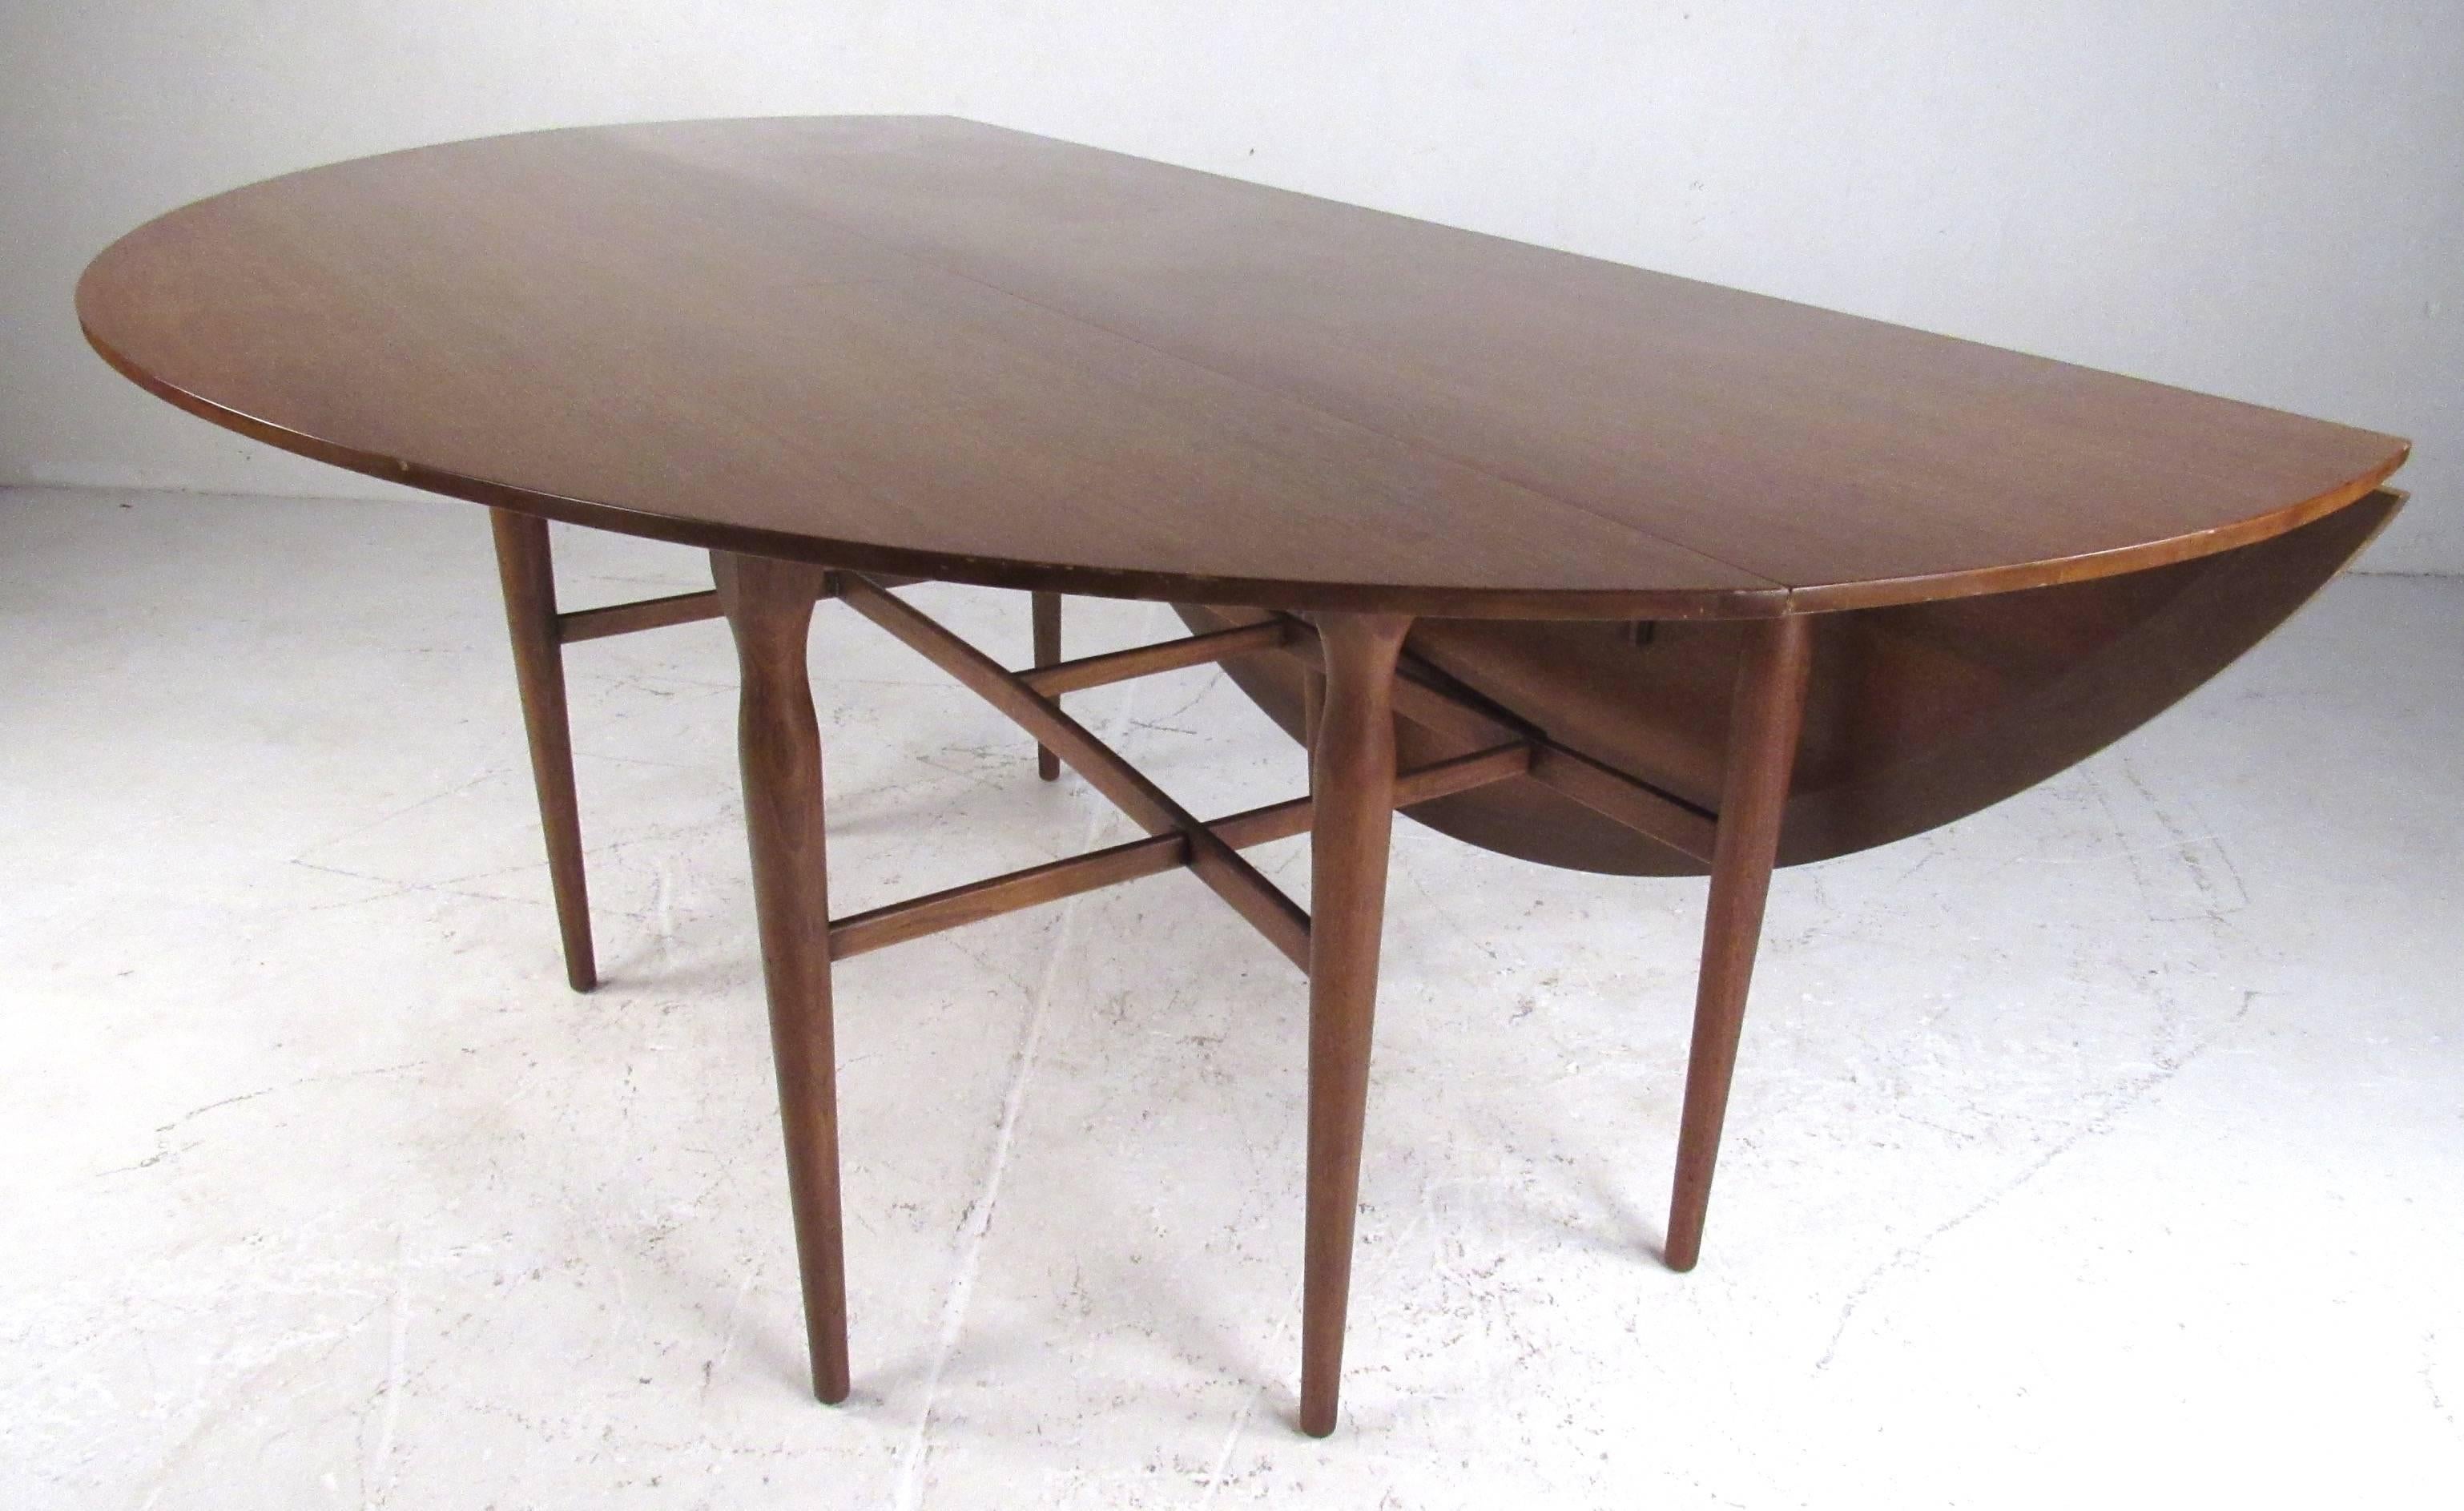 Beautiful walnut gateleg dining table by Heritage-Henredon, circa 1960s. Featuring tapered legs and two folding leaves which expand the table from 19.5